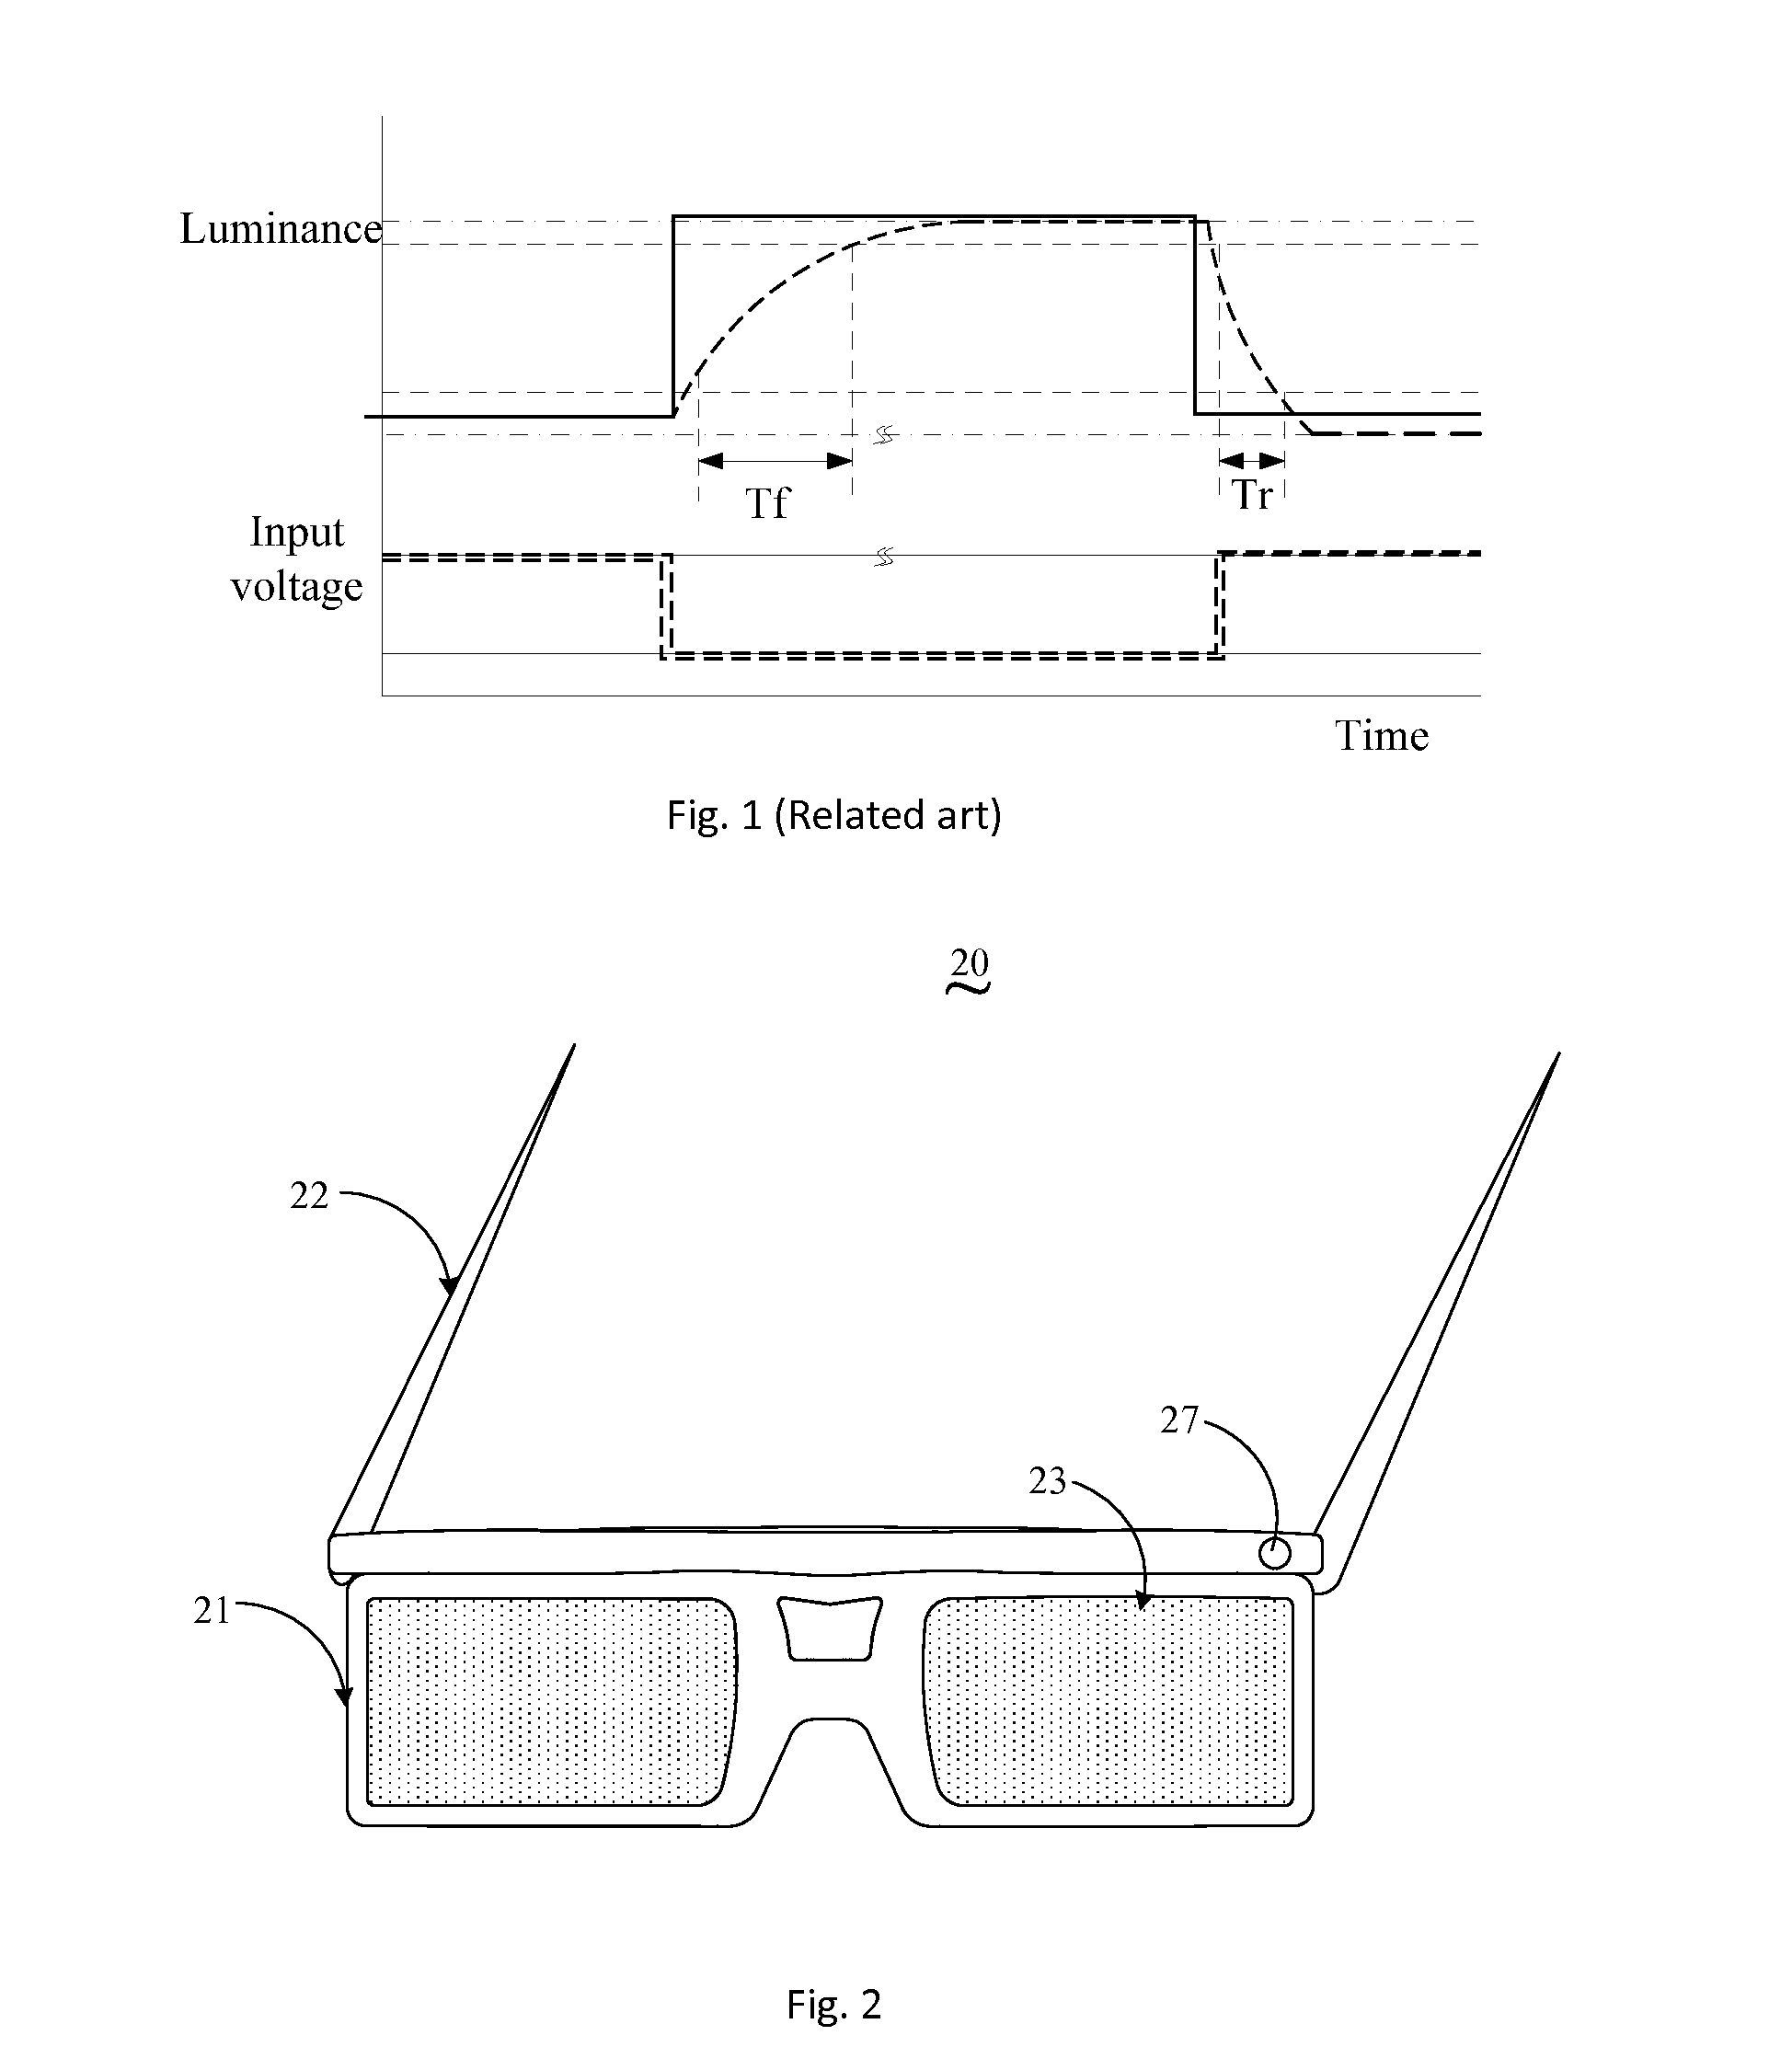 Shutter glasses and related 3D display system